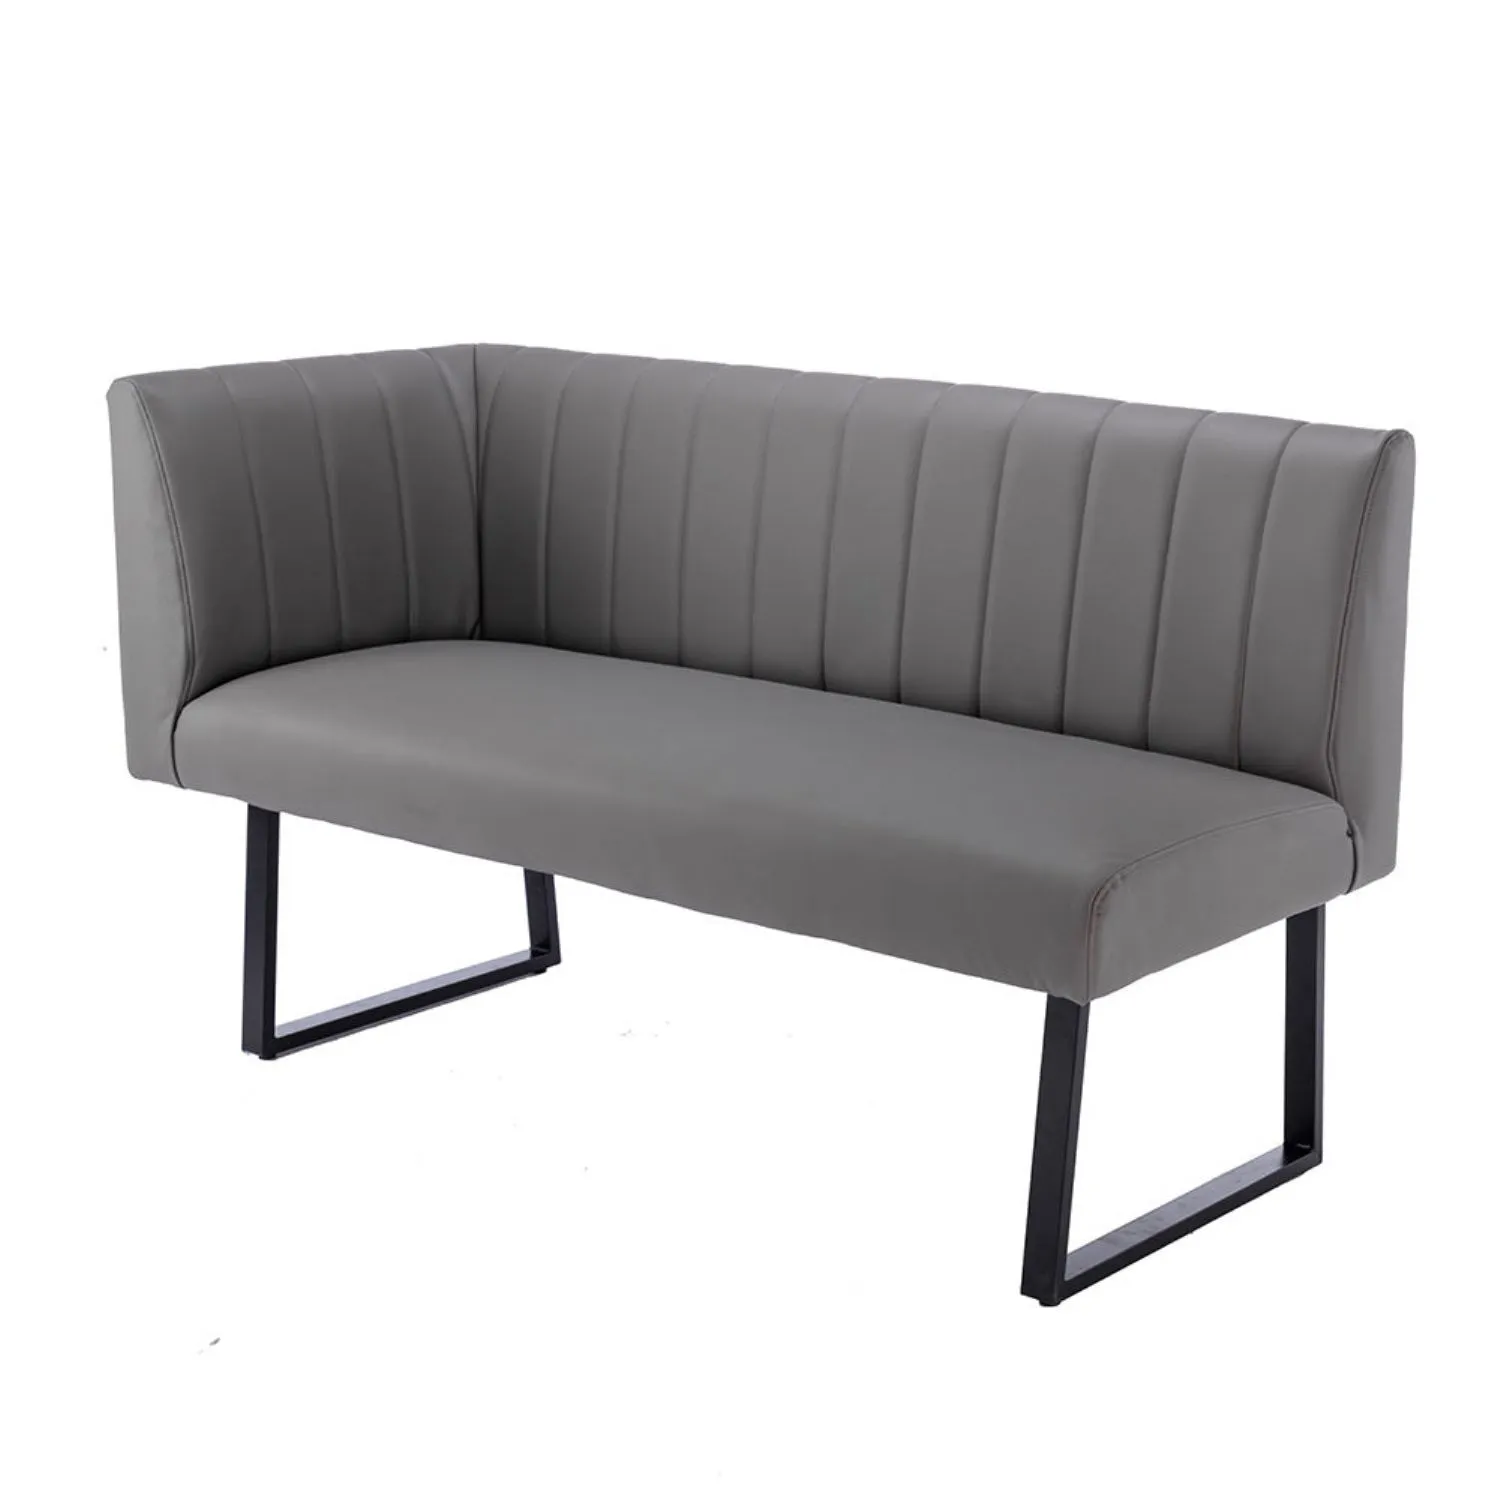 The Chair Collection Corner Bench Part 2 (Righthand) Grey